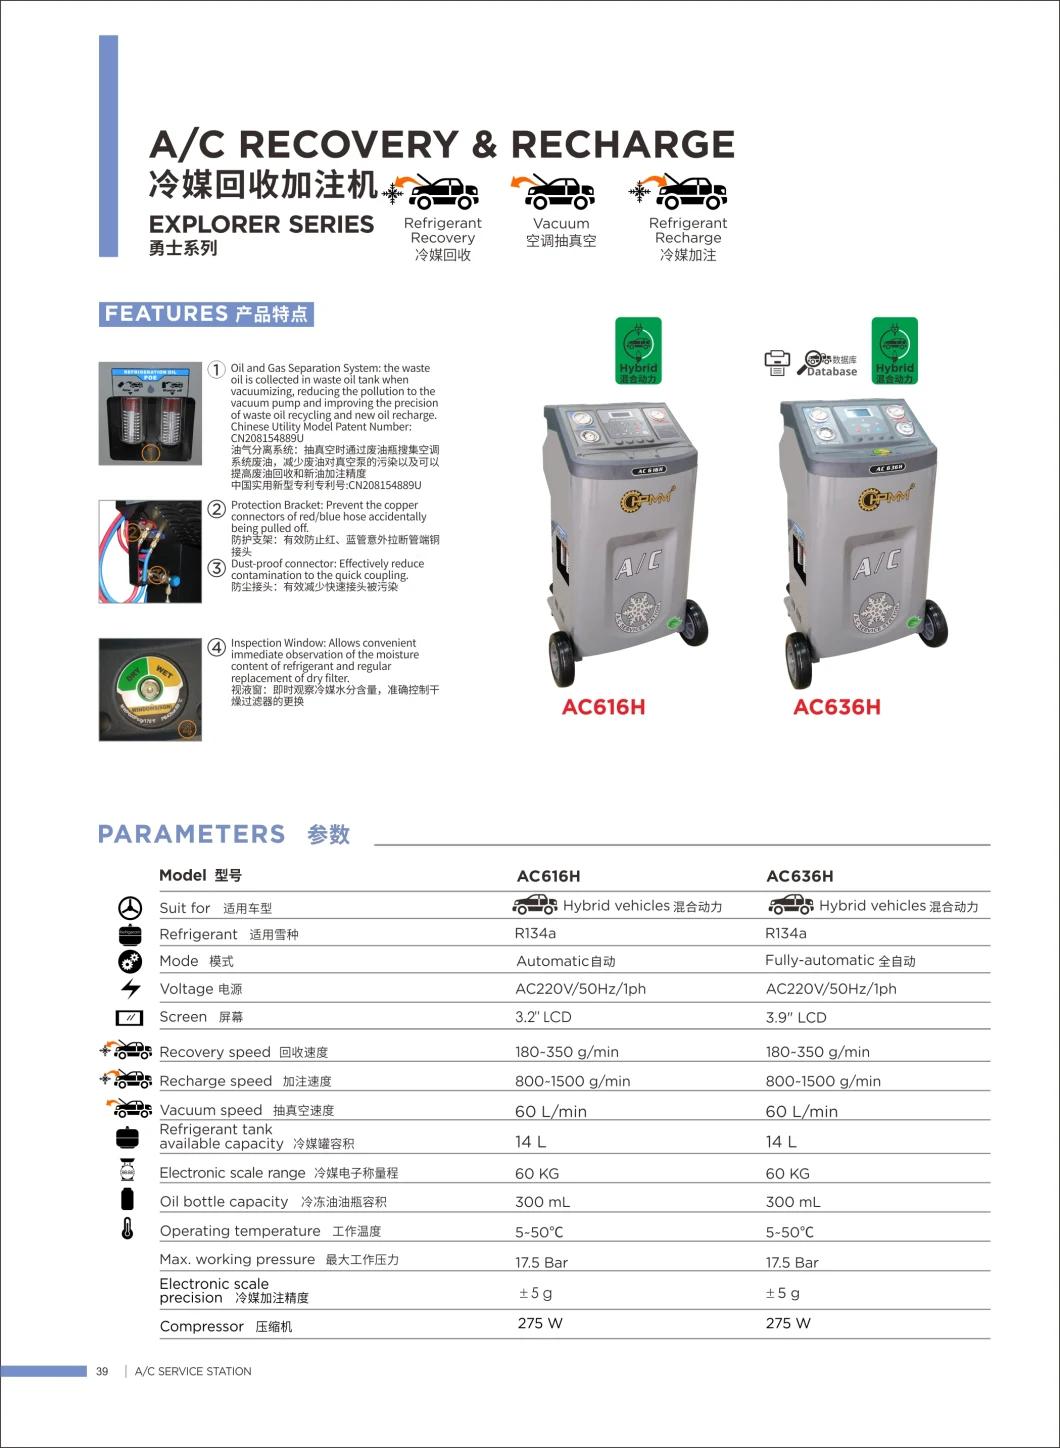 A/C Recovery Machine AC636h A/C Recycling & Recharger R-134A Refrigerant Recovery, Recycling and Recharging Machine